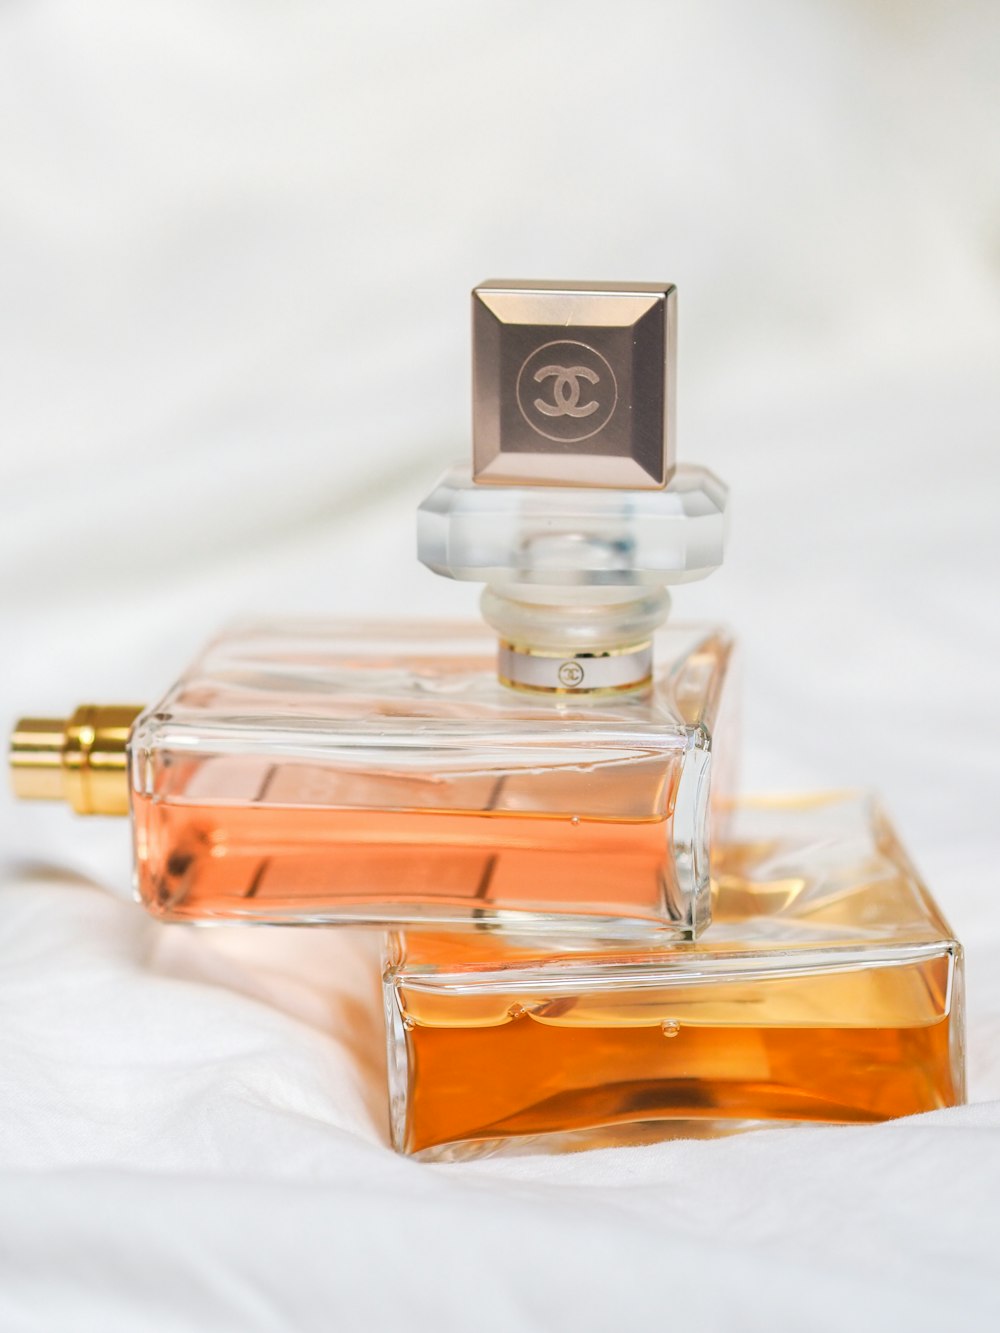 clear glass perfume bottle on white textile